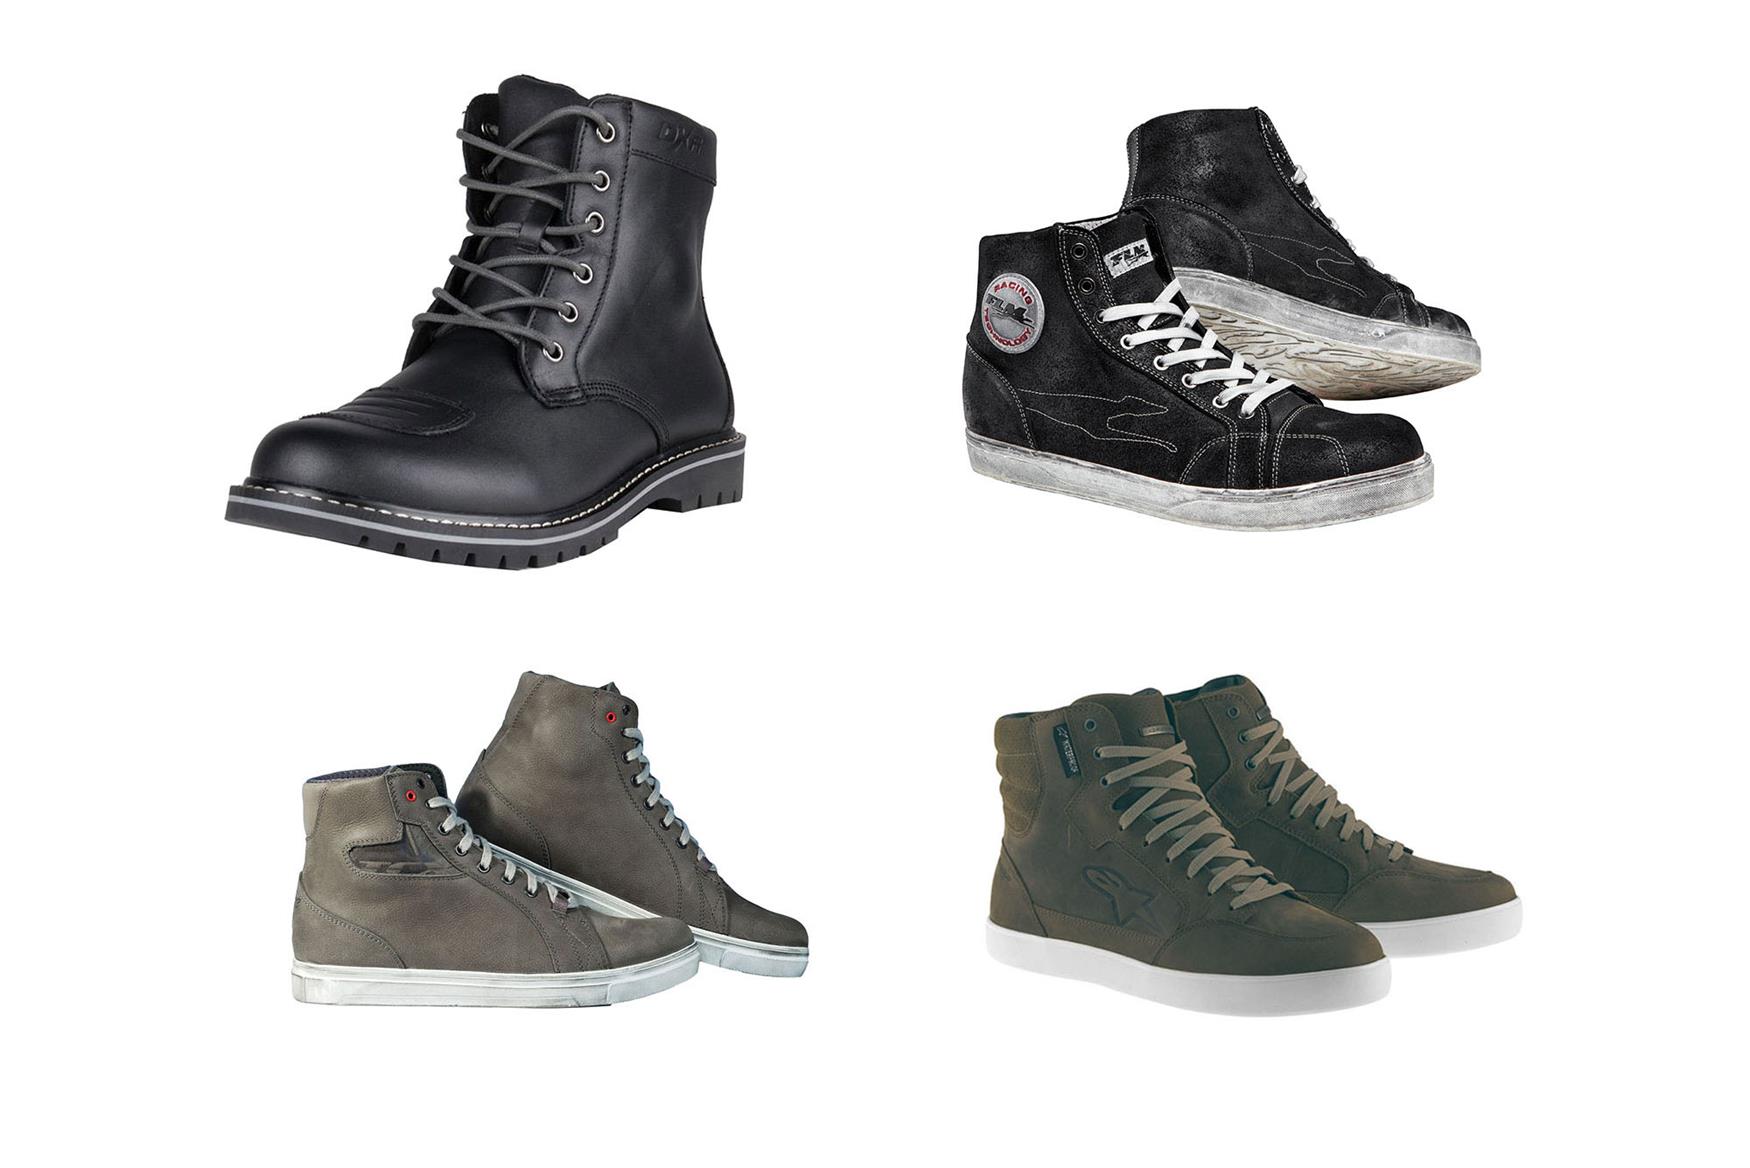 Top 4 casual style riding boots | MCN